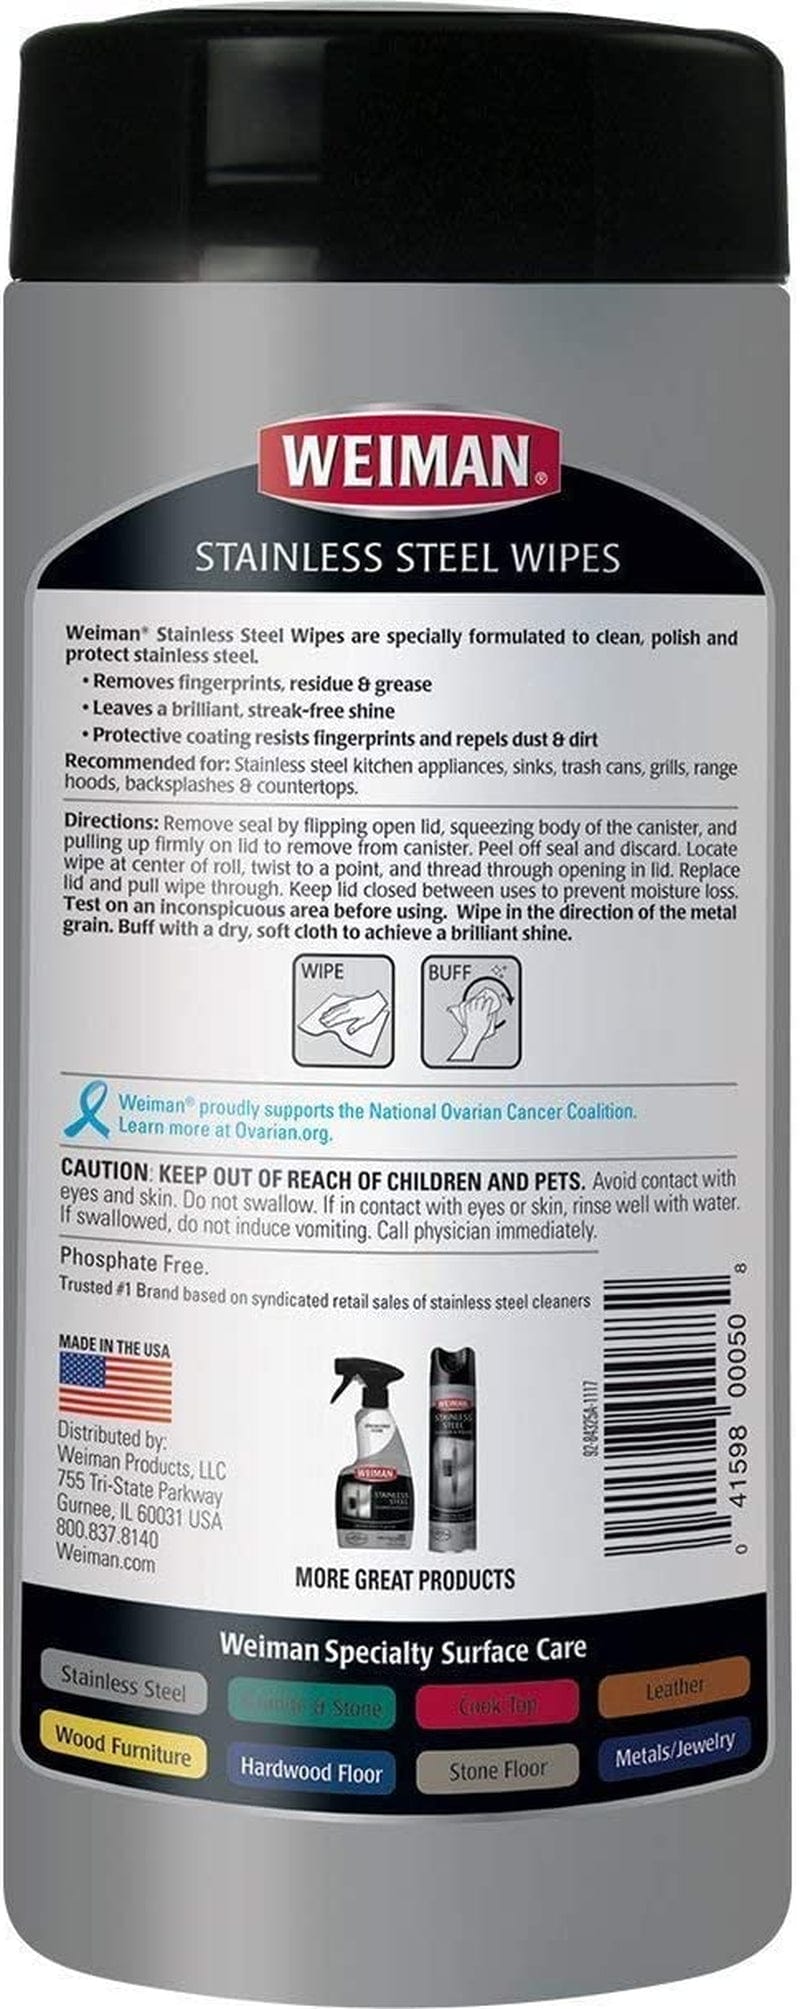 Weiman Stainless Steel Cleaning Wipes [2 Pack] Removes Fingerprints, Residue, Water Marks and Grease from Appliances - Works Great on Refrigerators, Dishwashers, Ovens, Grills and More(8 X 6.6 X 3.2)